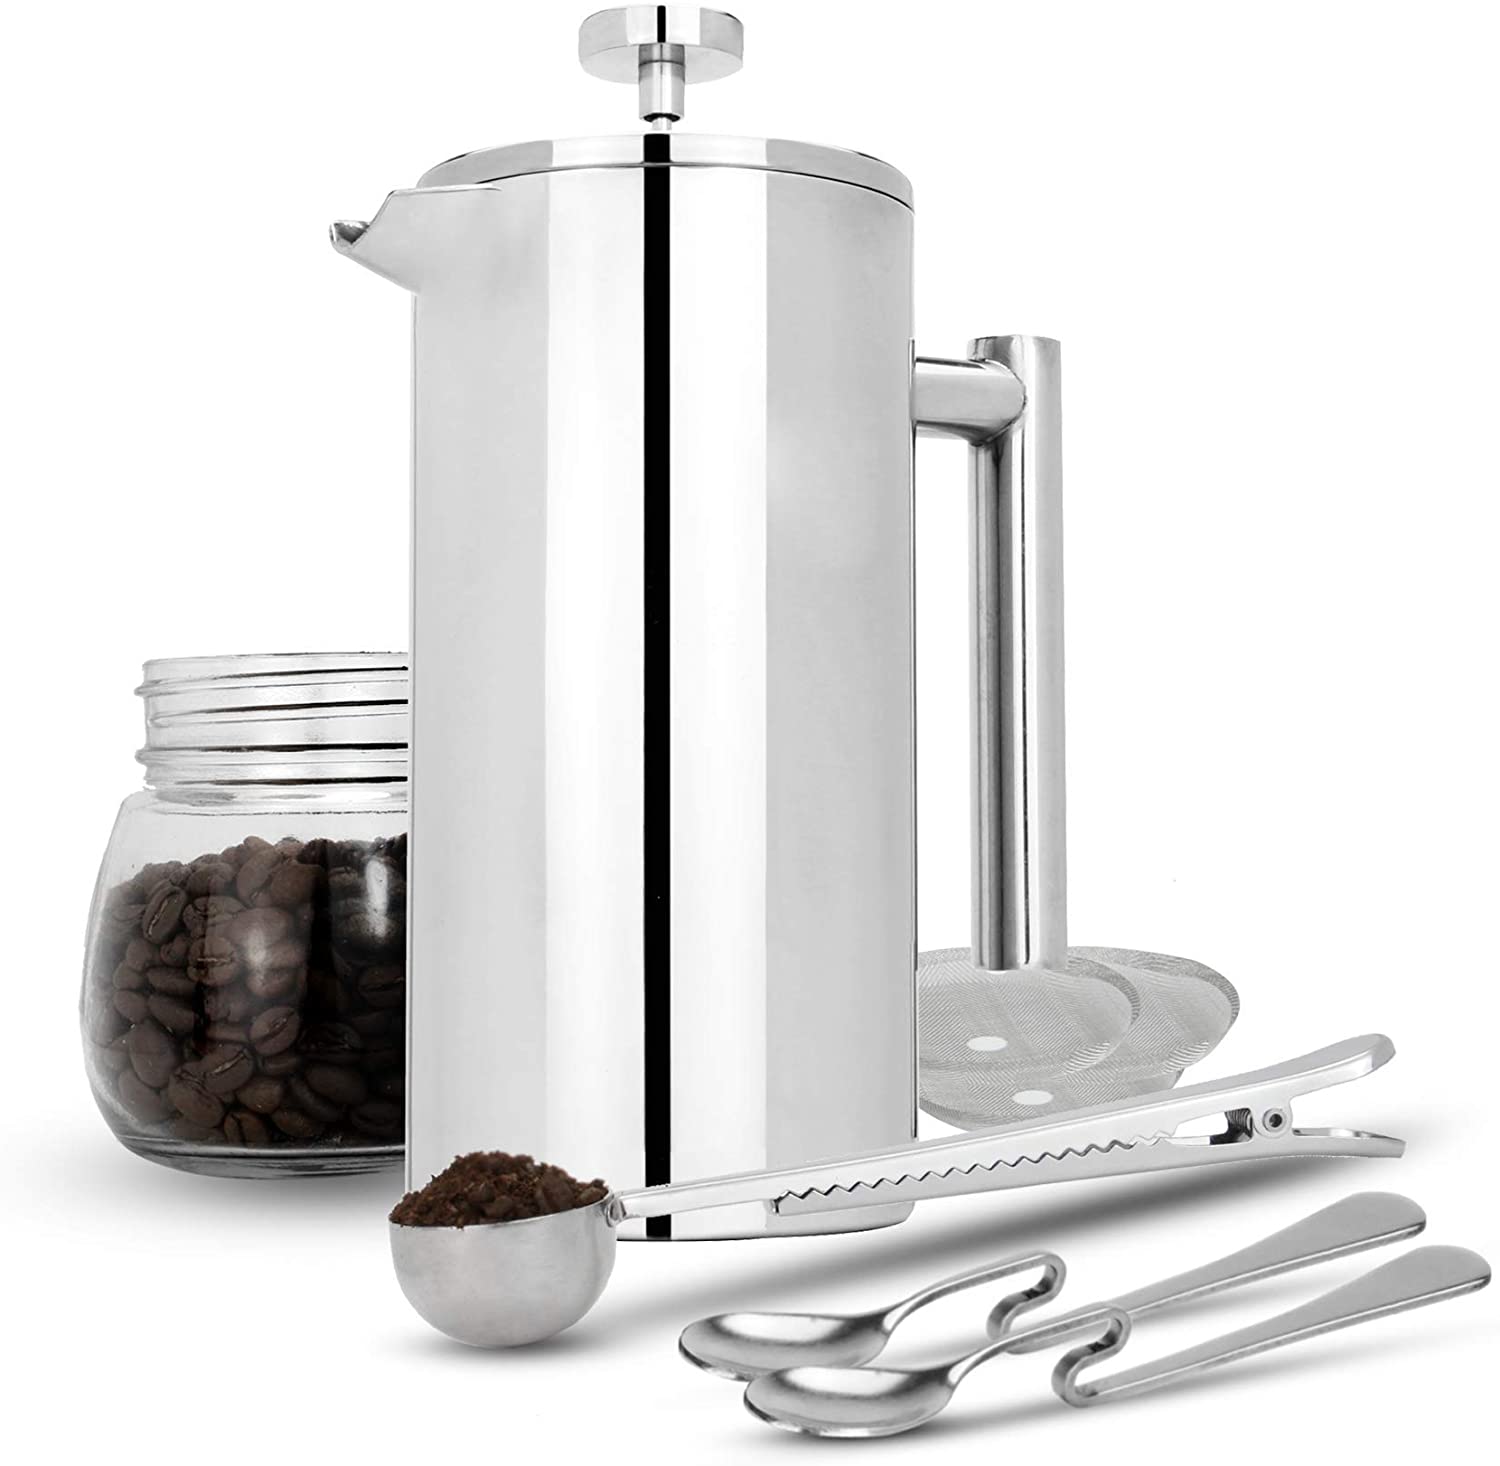 Maison & White M&W French Press Stainless Steel Coffee Maker with Additional Filter/Measuring Spoon/Bag Clip, Double Wall Insulation - 7 Piece Coffee Gift Set, 350ml